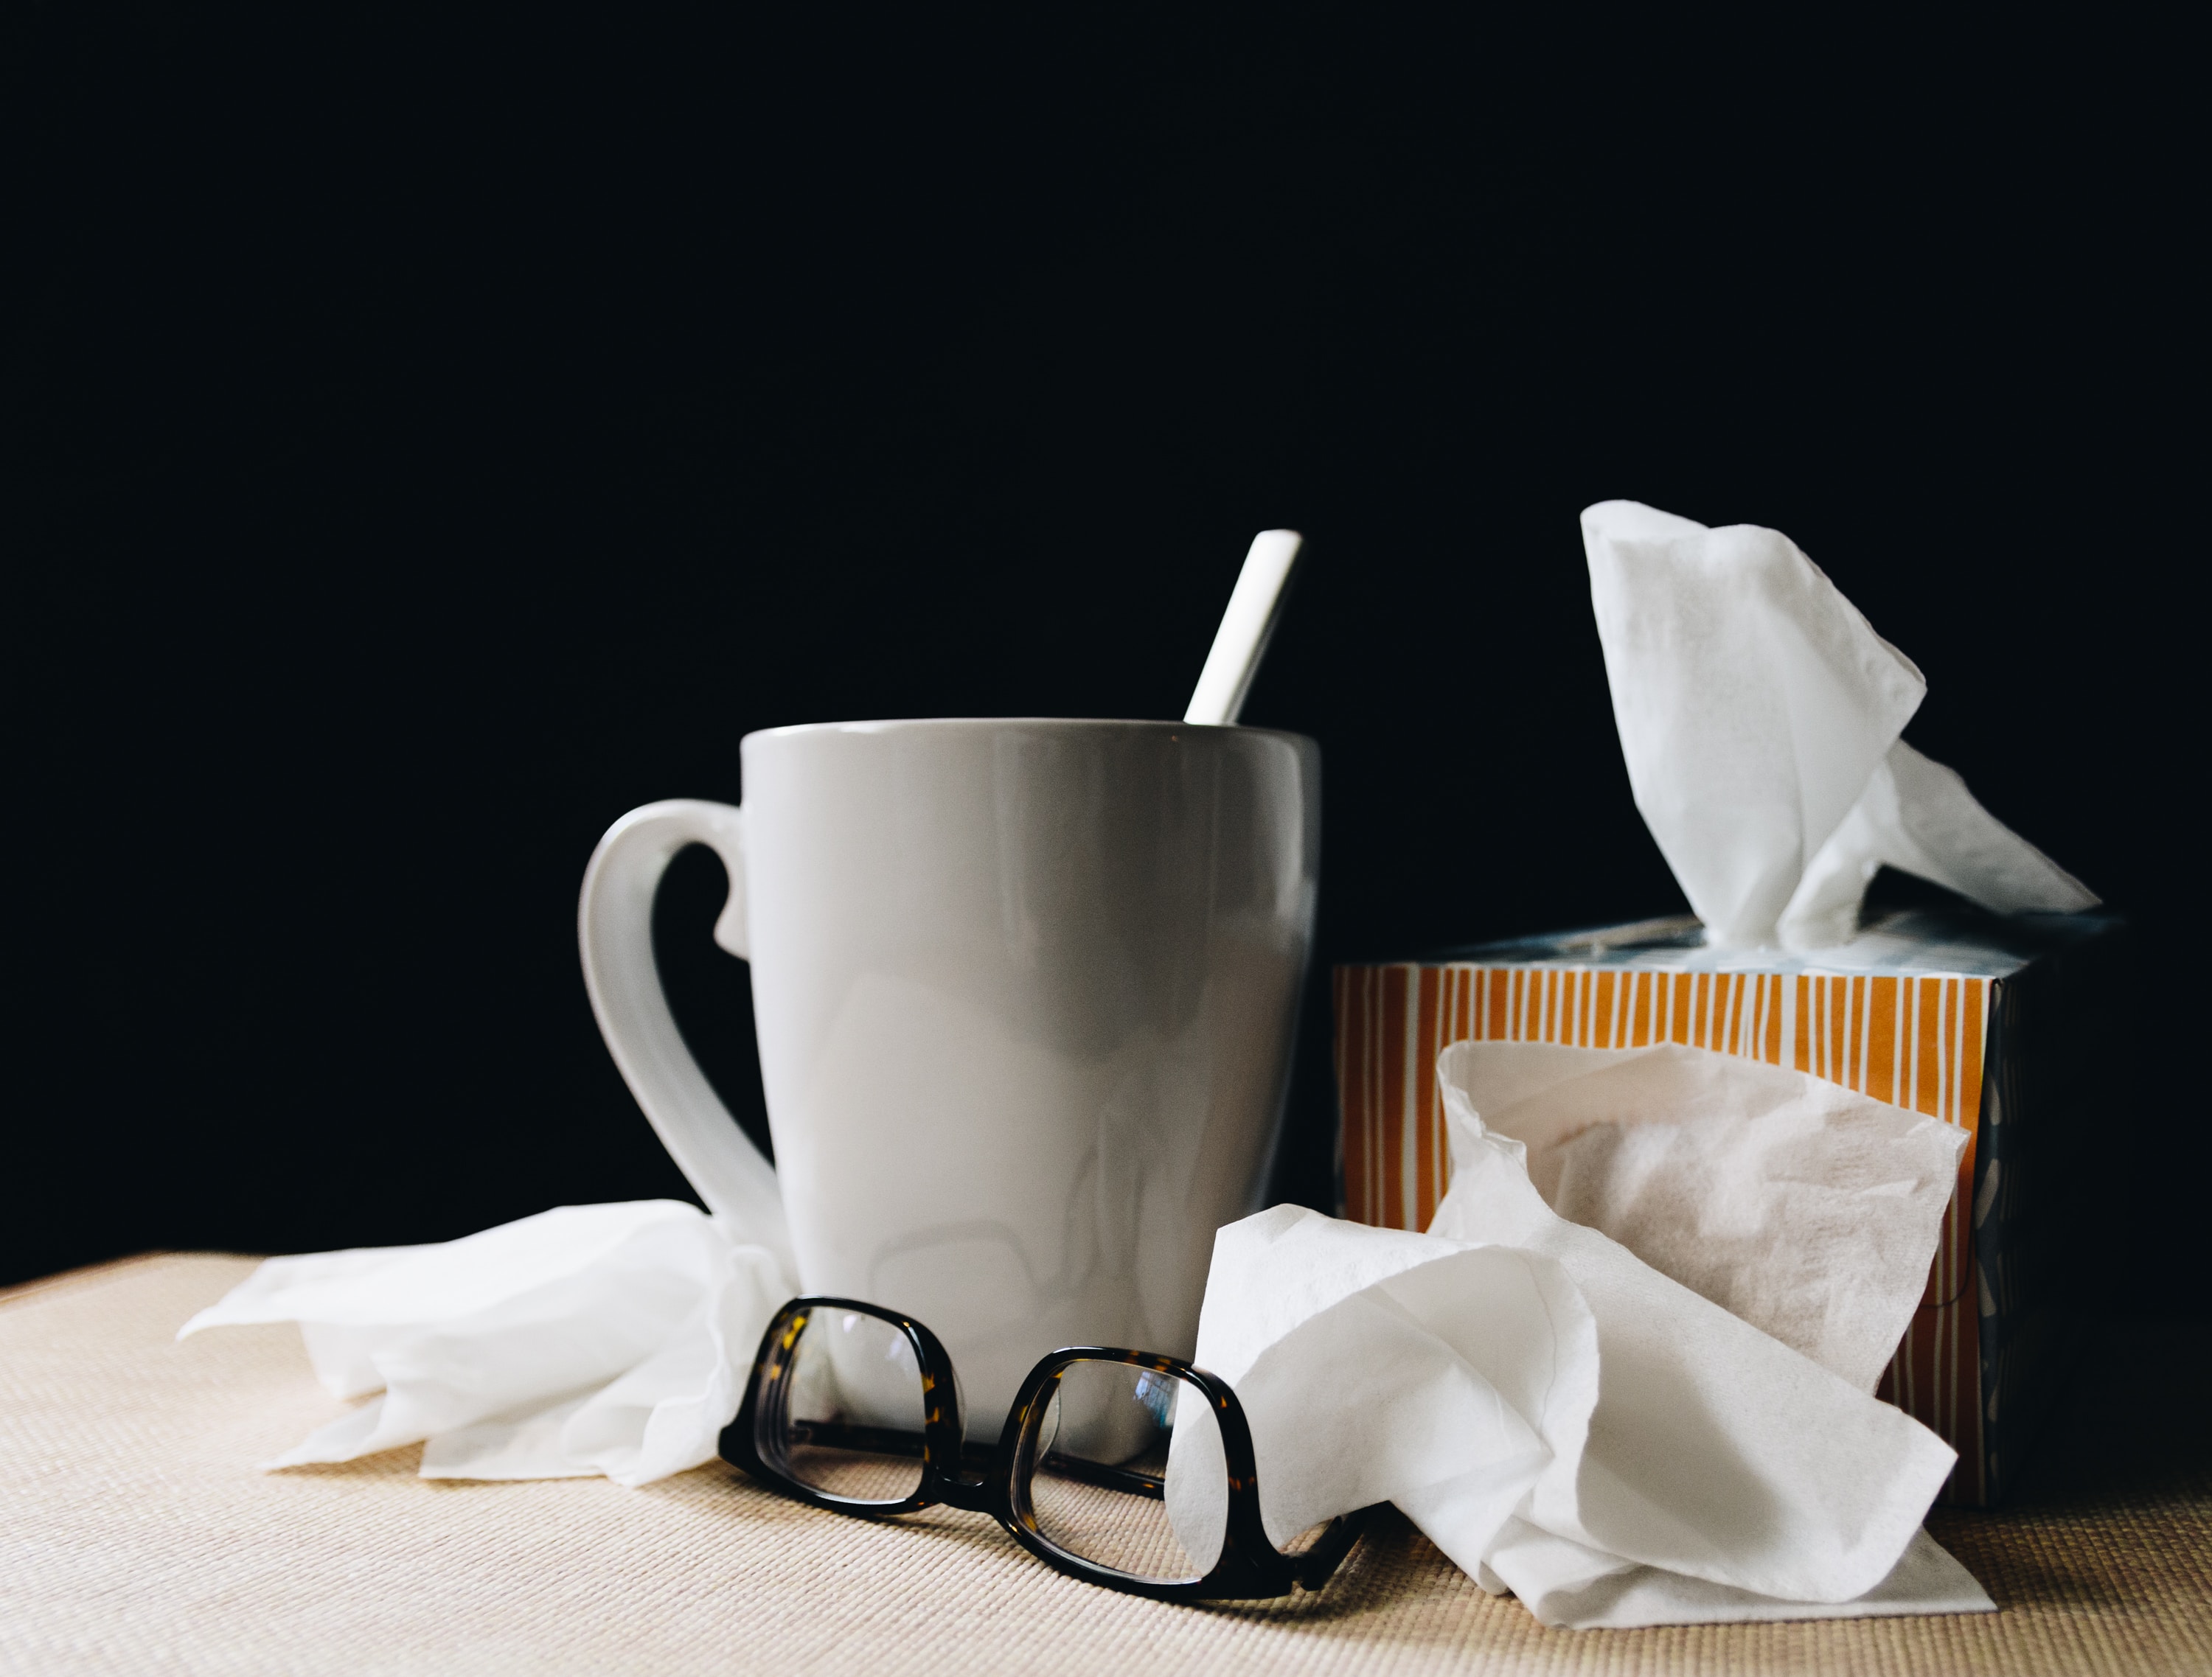 Cold and Flu Season is the Worst of the Worst.